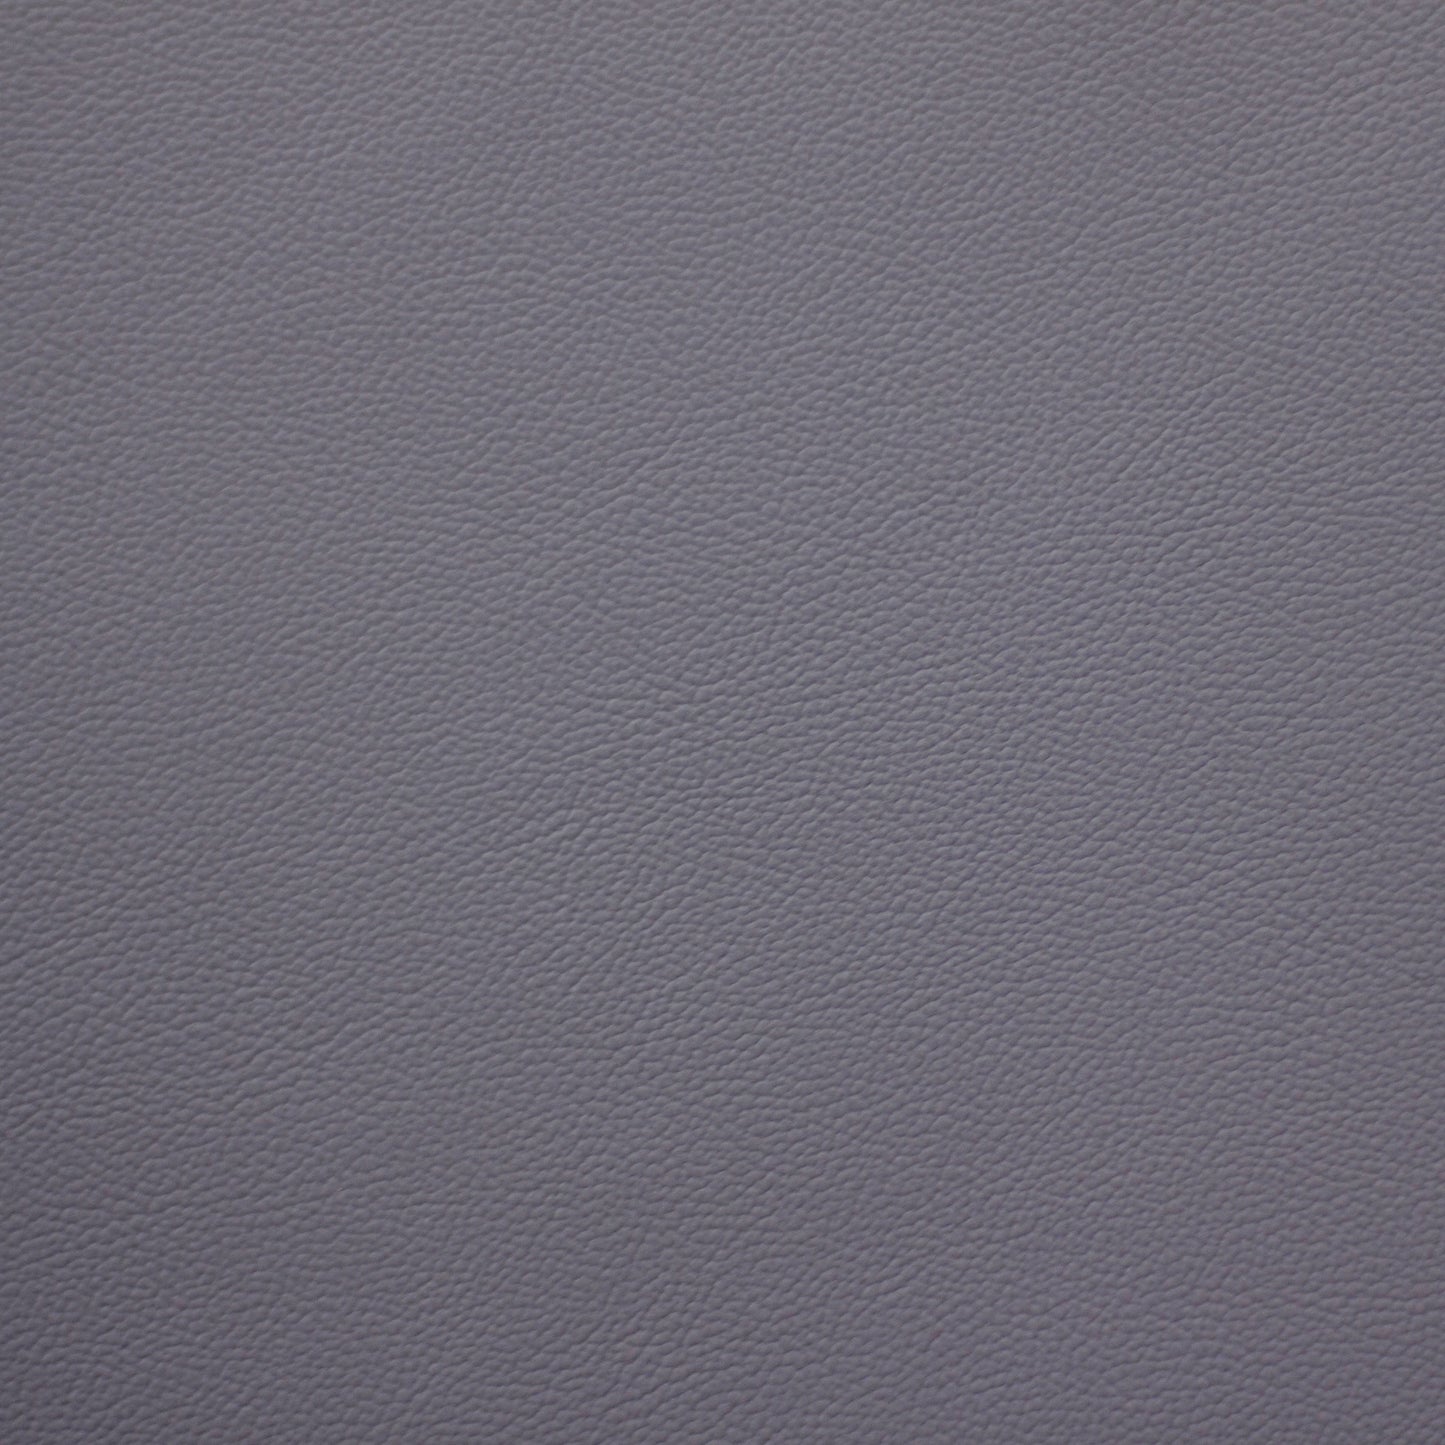 Empire, Nebula, Iconic® Antimicrobial & Cleanable, Hospitality Leather Hide